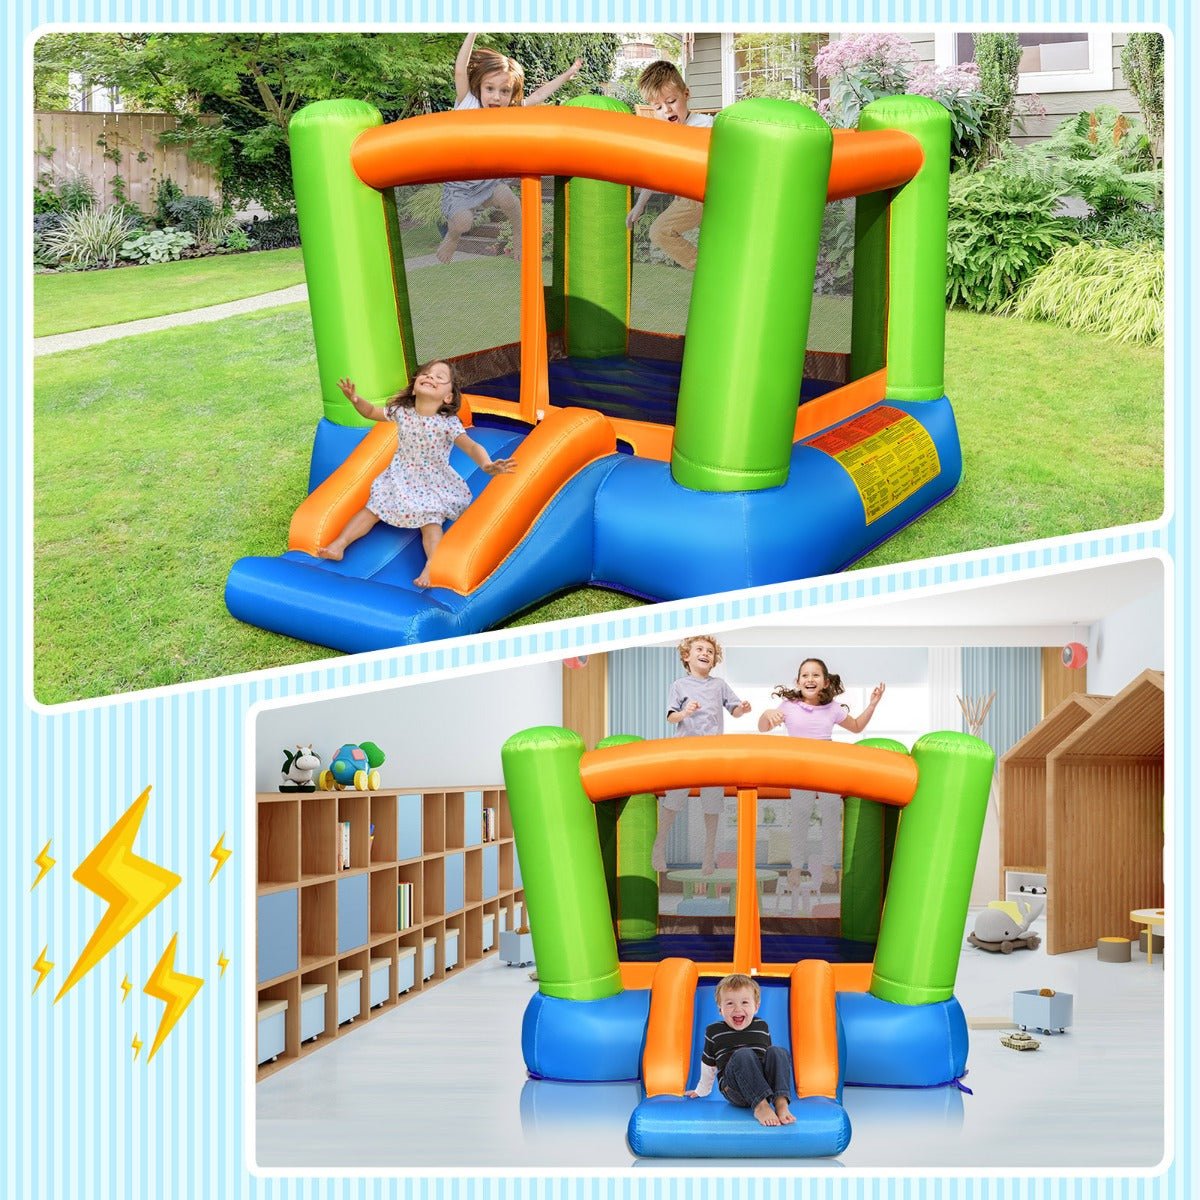 Buy the Perfect Inflatable Bounce House for Hours of Fun